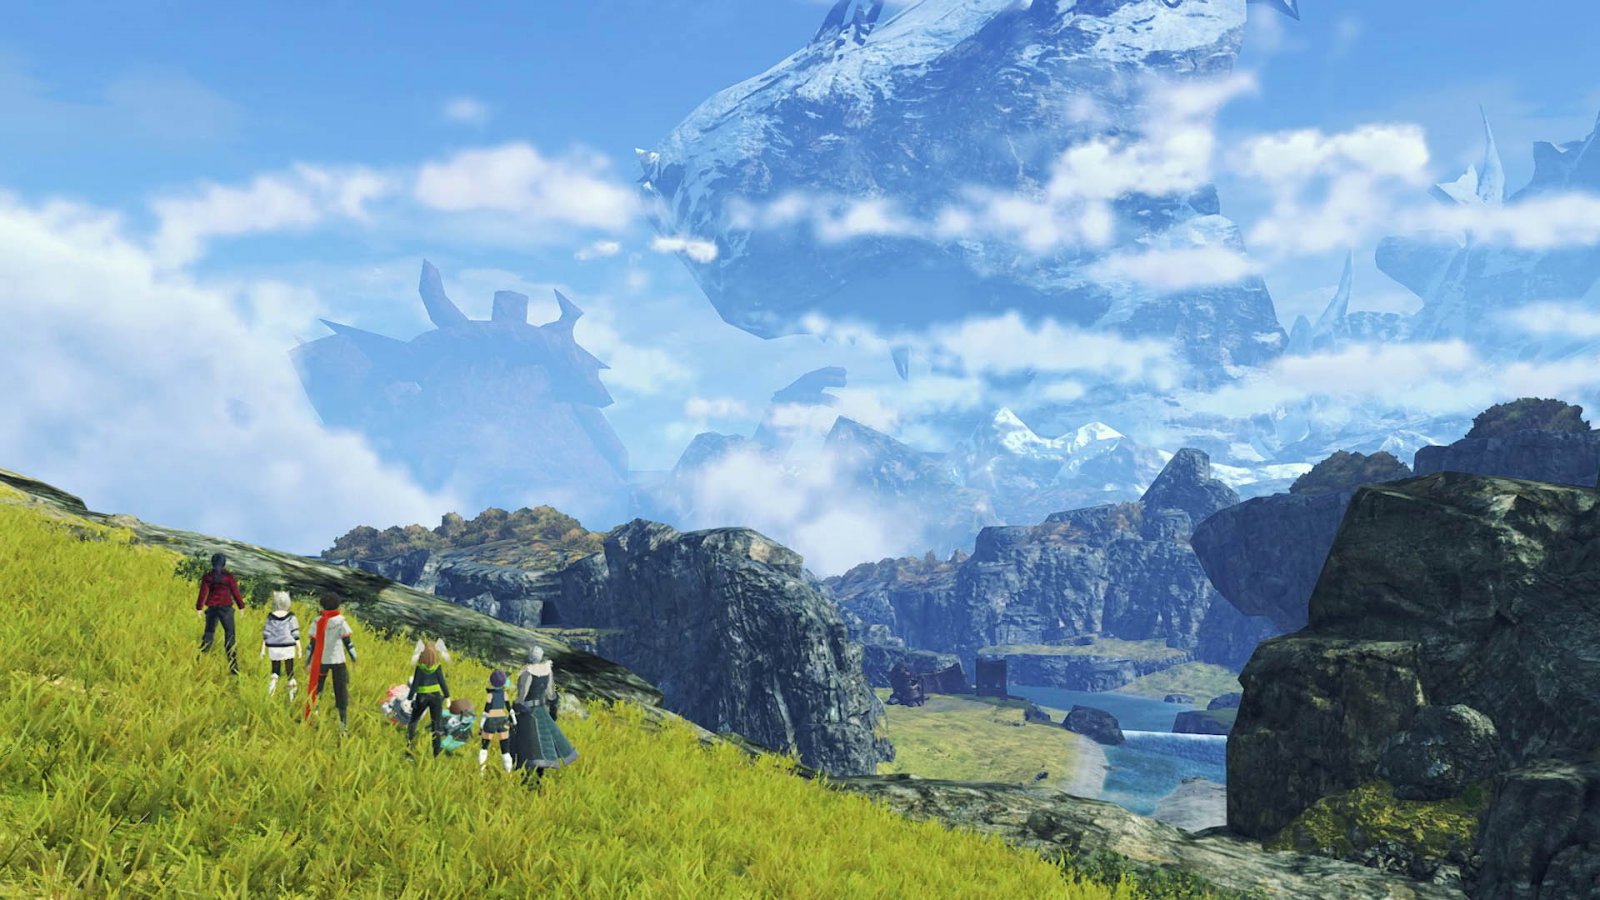 XC3 has now reached a generally favorable user review score in Metacritic :  r/Xenoblade_Chronicles